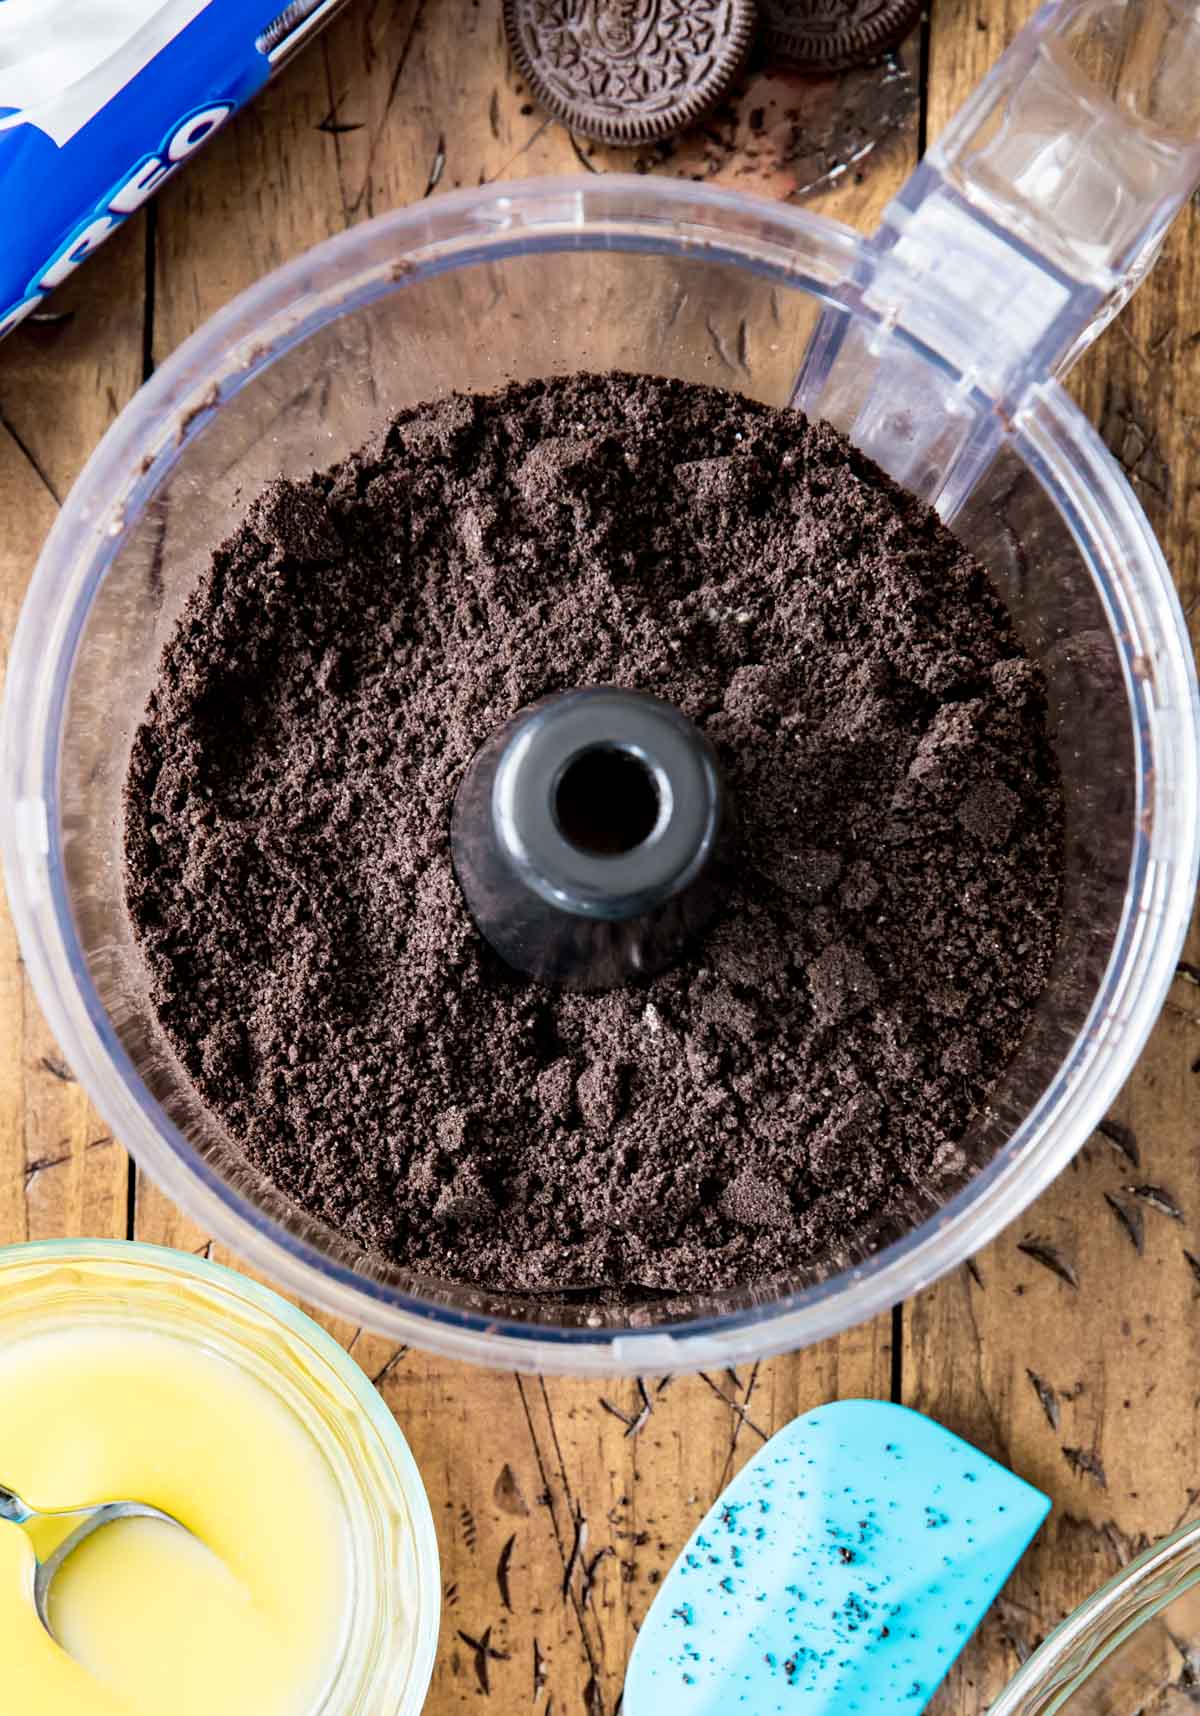 Overhead view of Oreo crumbs in a food processor bowl.